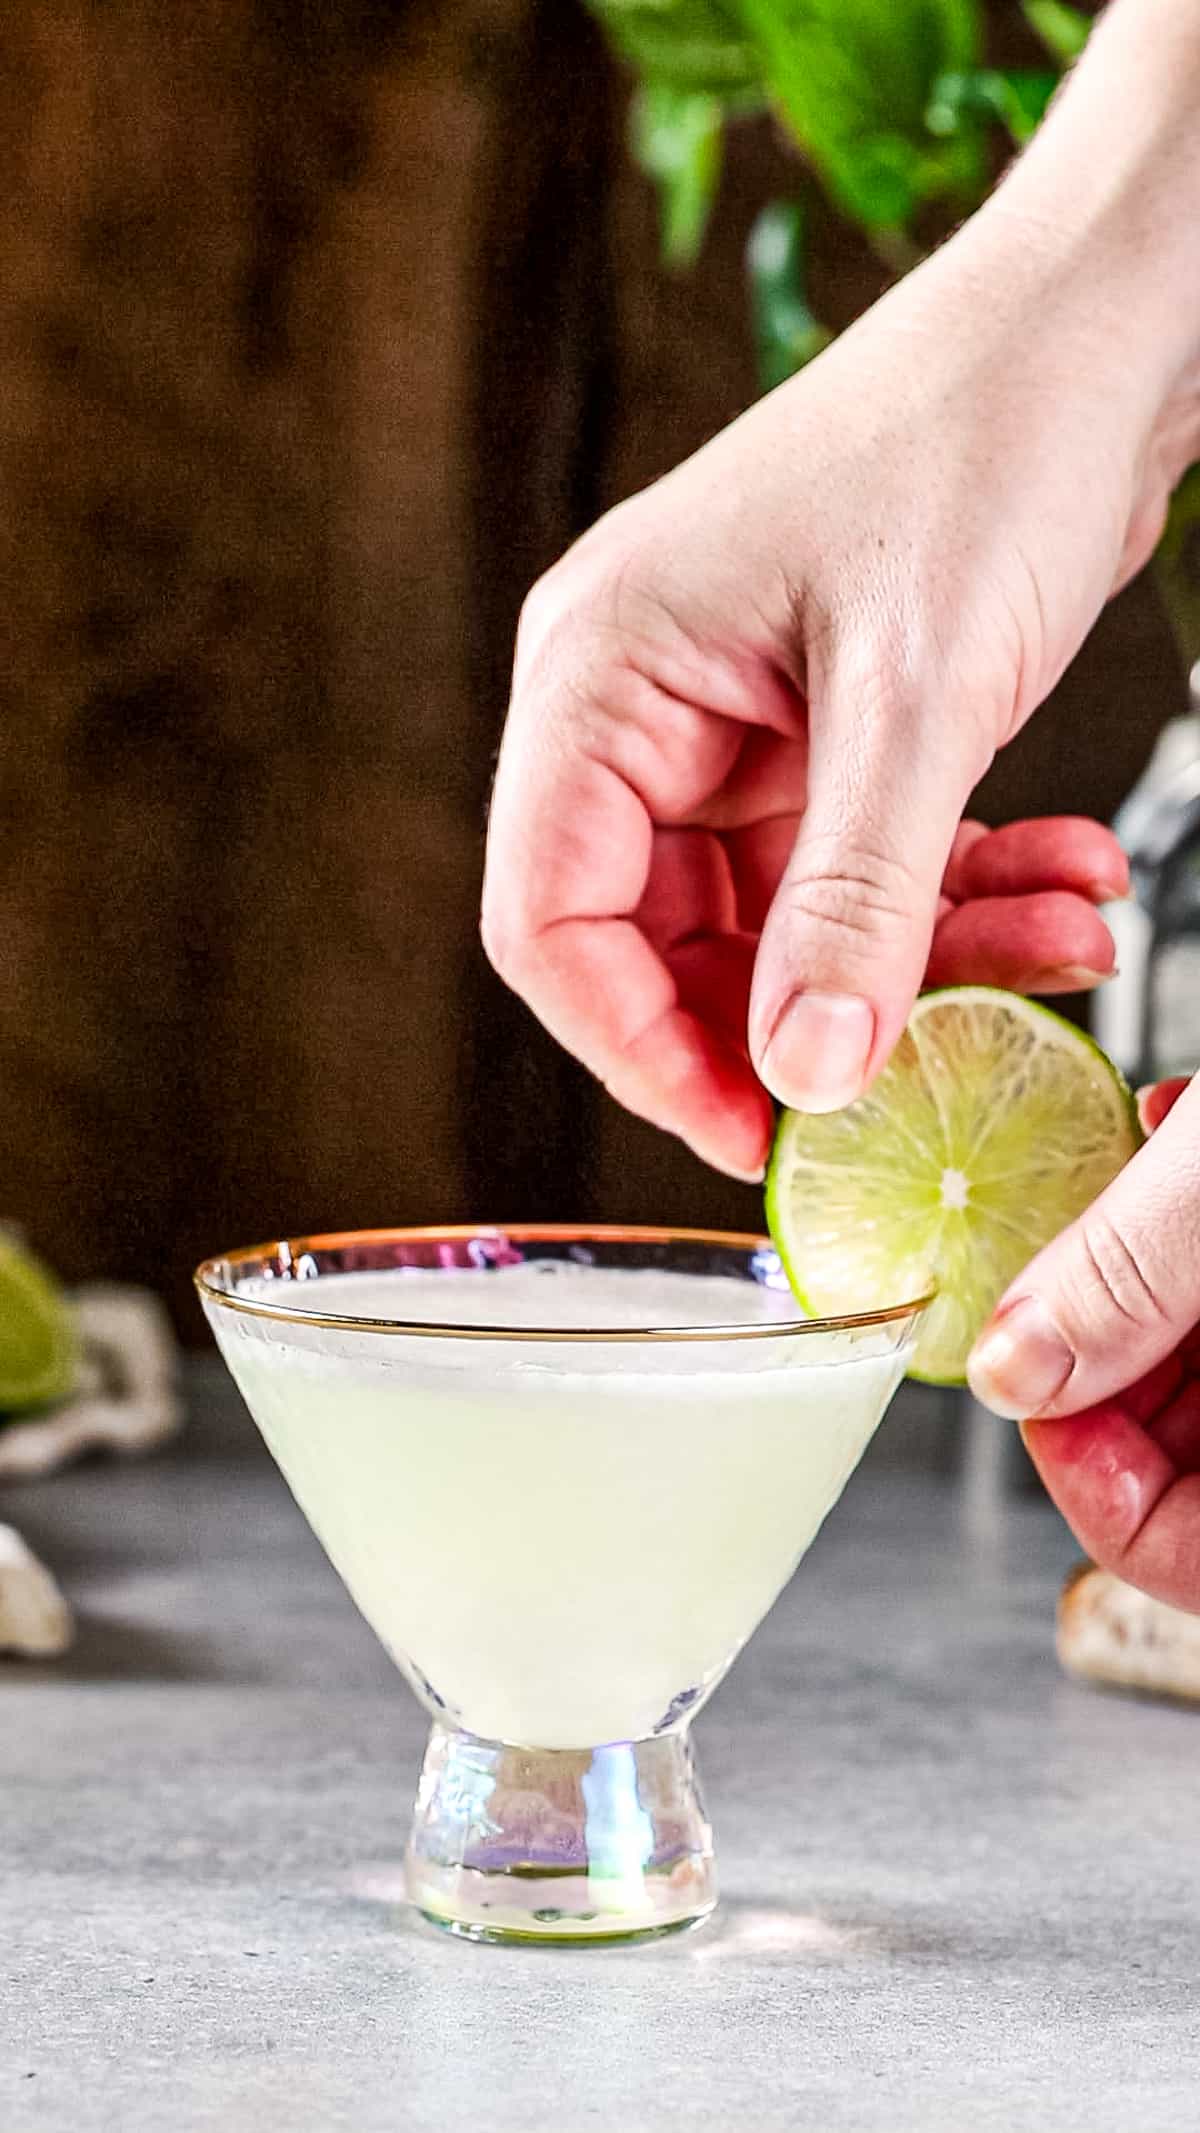 Hand adding a lime slice to the side of a martini glass.